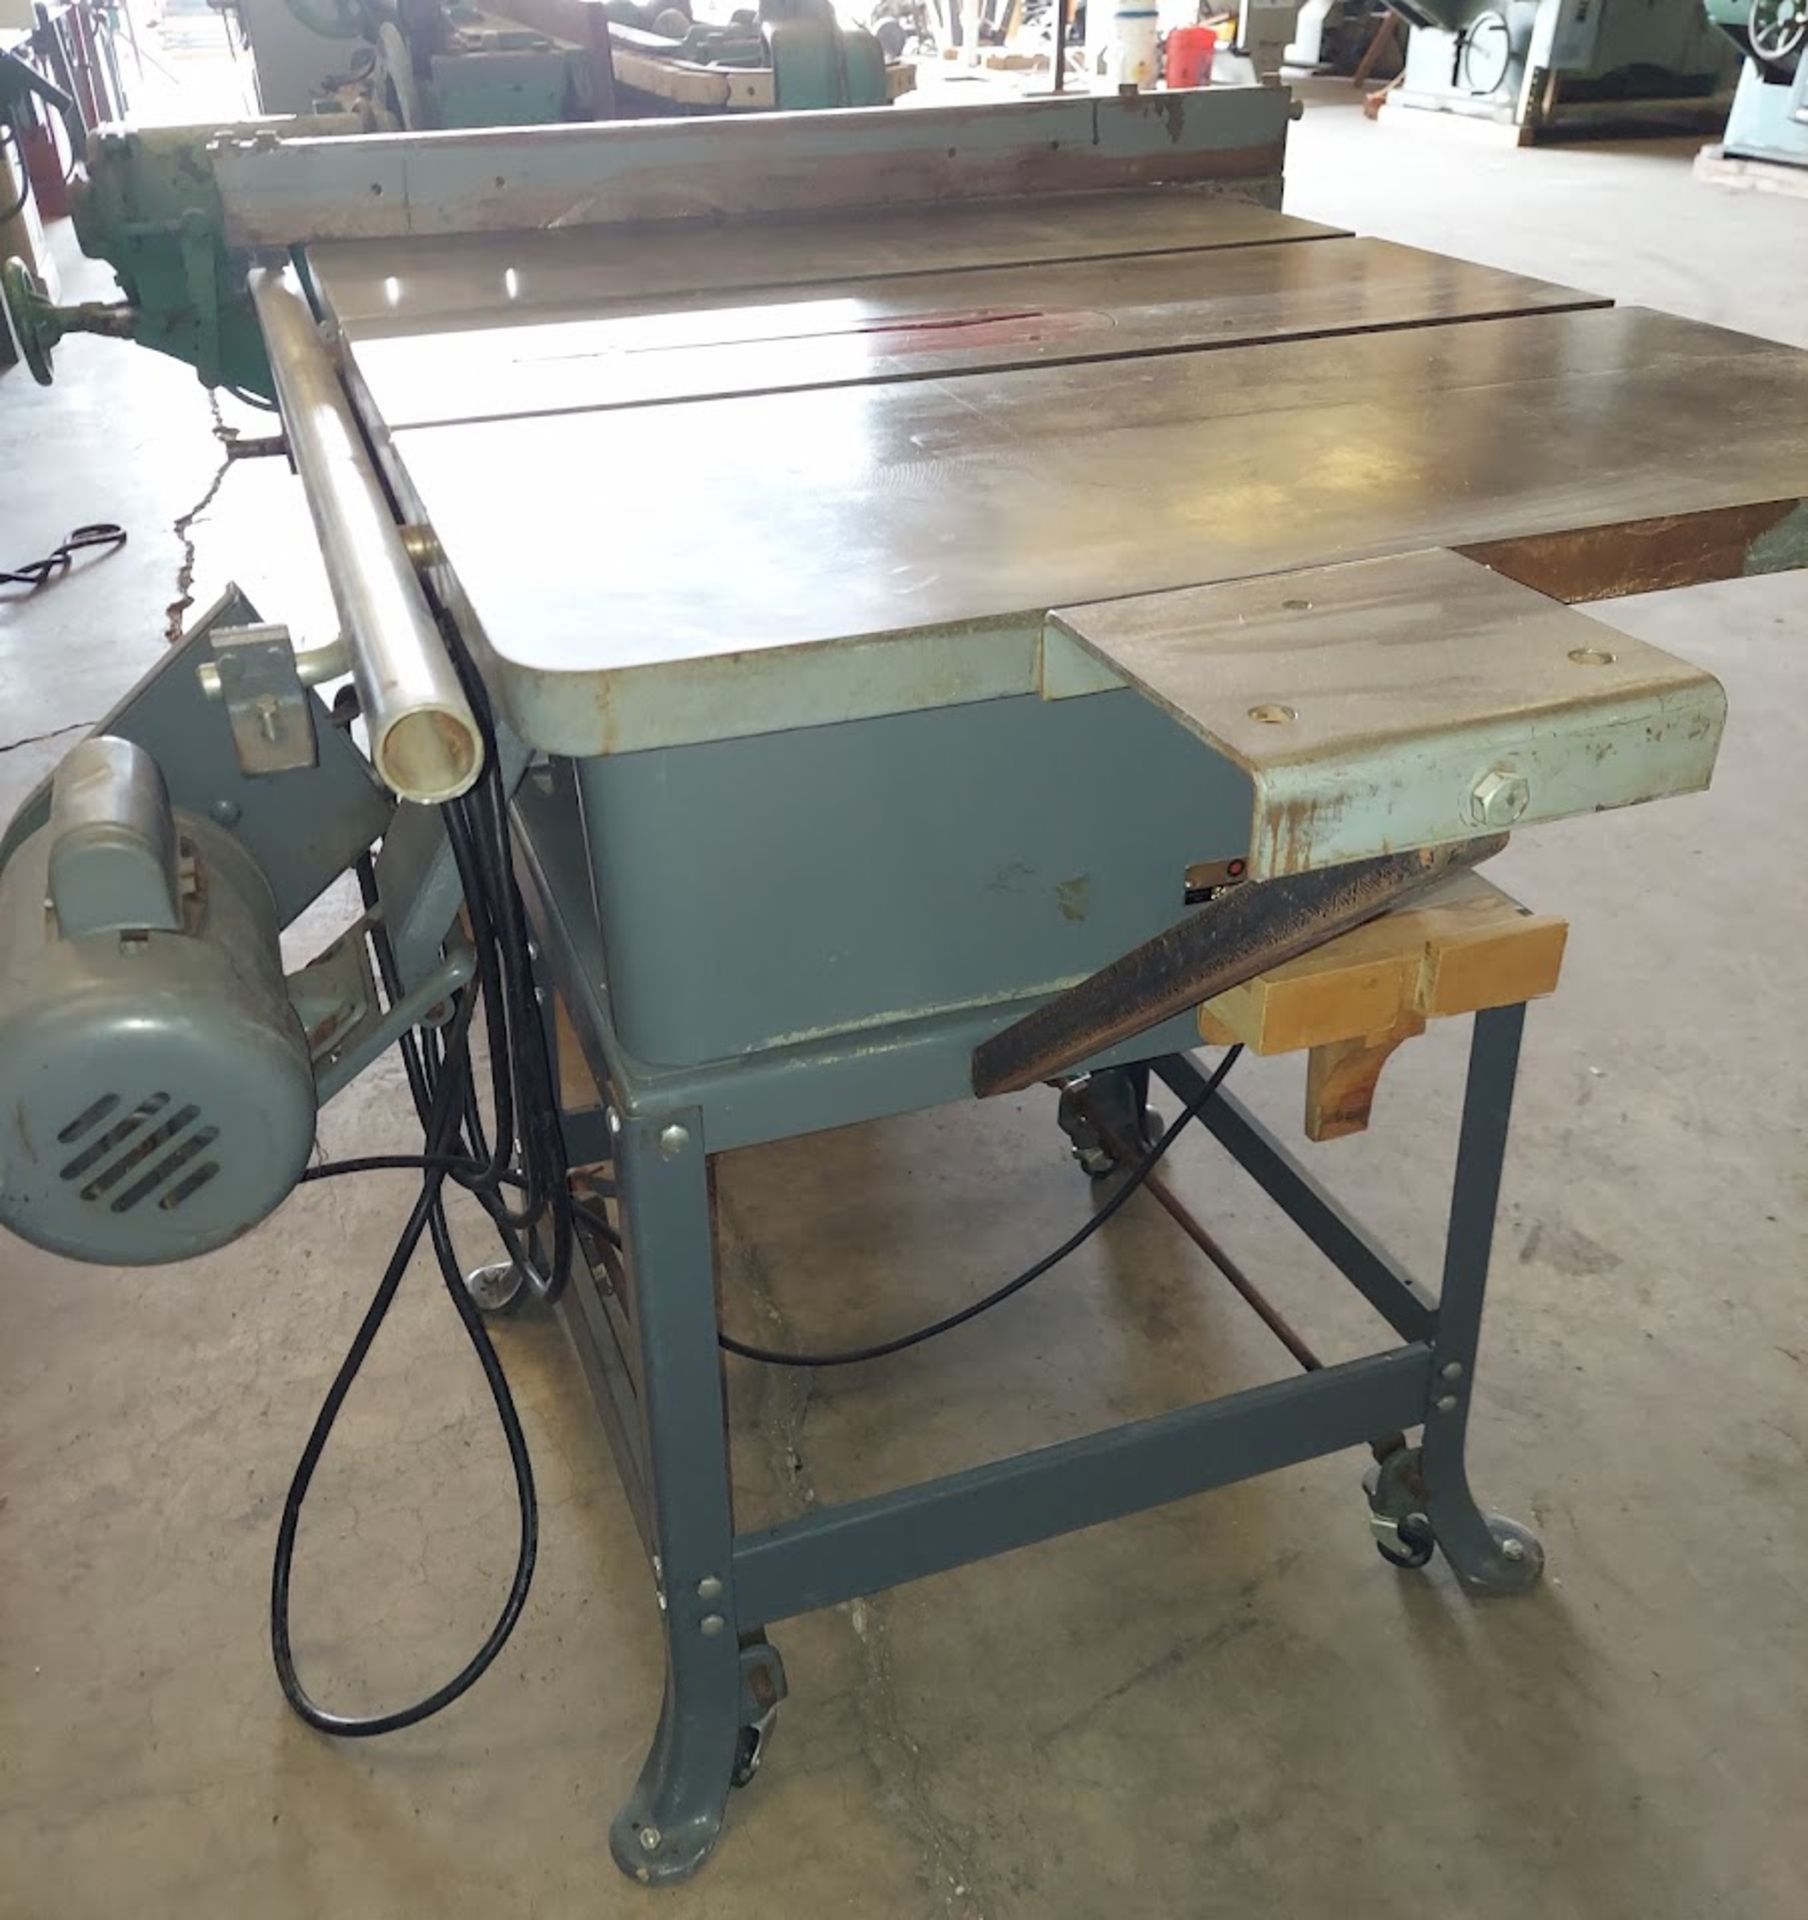 Rockwell / Delta 10" Contractors Table Saw, 1 hp, 115/230 volts 1ph - Image 5 of 5